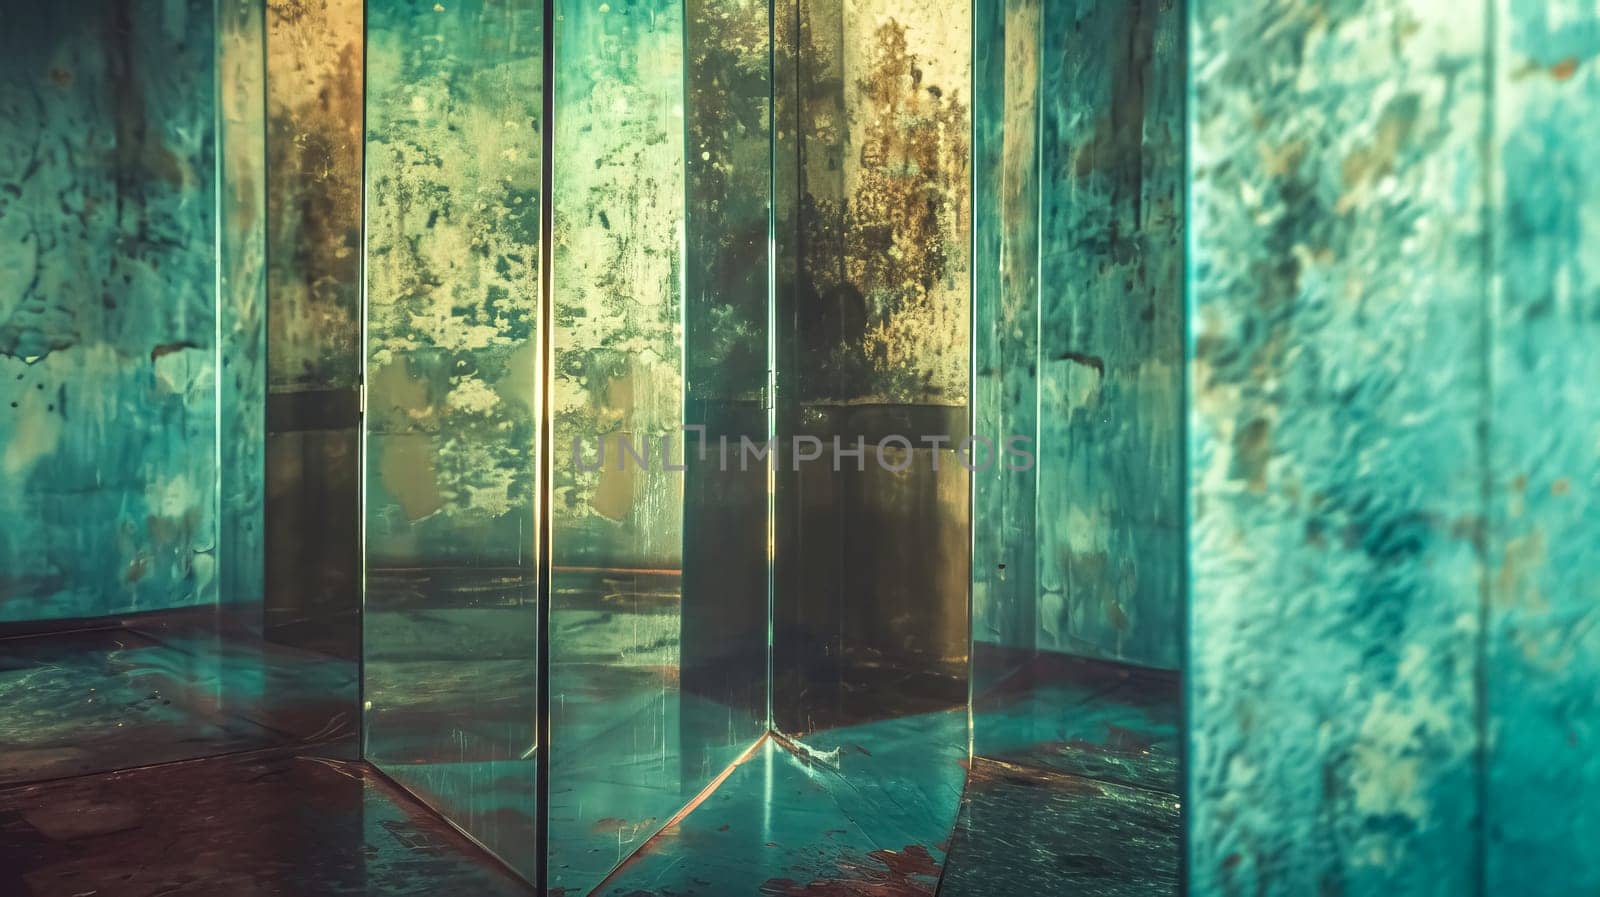 Moody and atmospheric image featuring weathered copper walls with a reflective surface